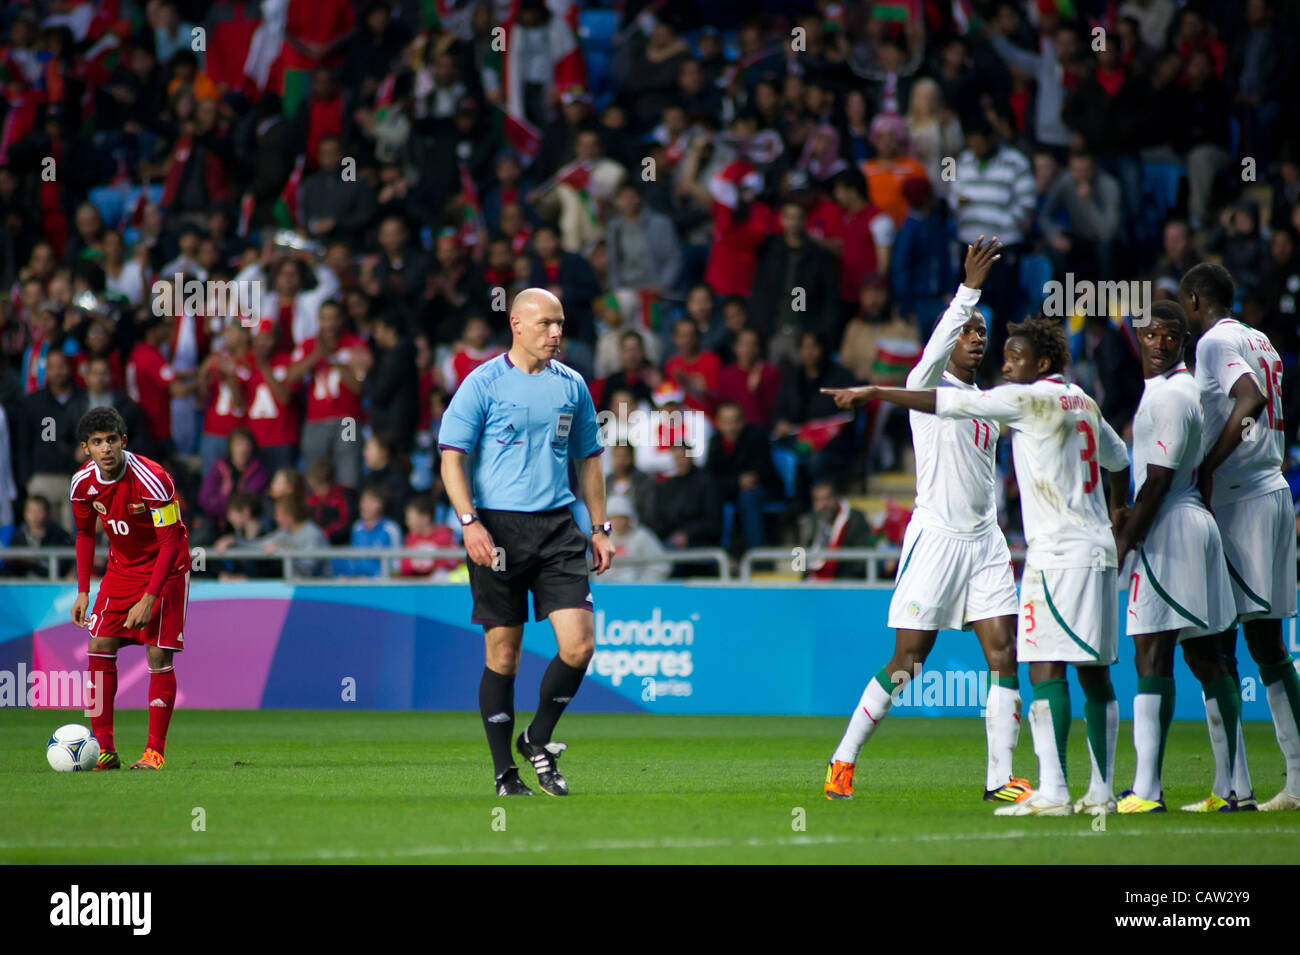 23.04.2012. Coventry, England. Senegal line out for a  free kick during the Olympic Qualifying match between Senegal and Oman. Stock Photo